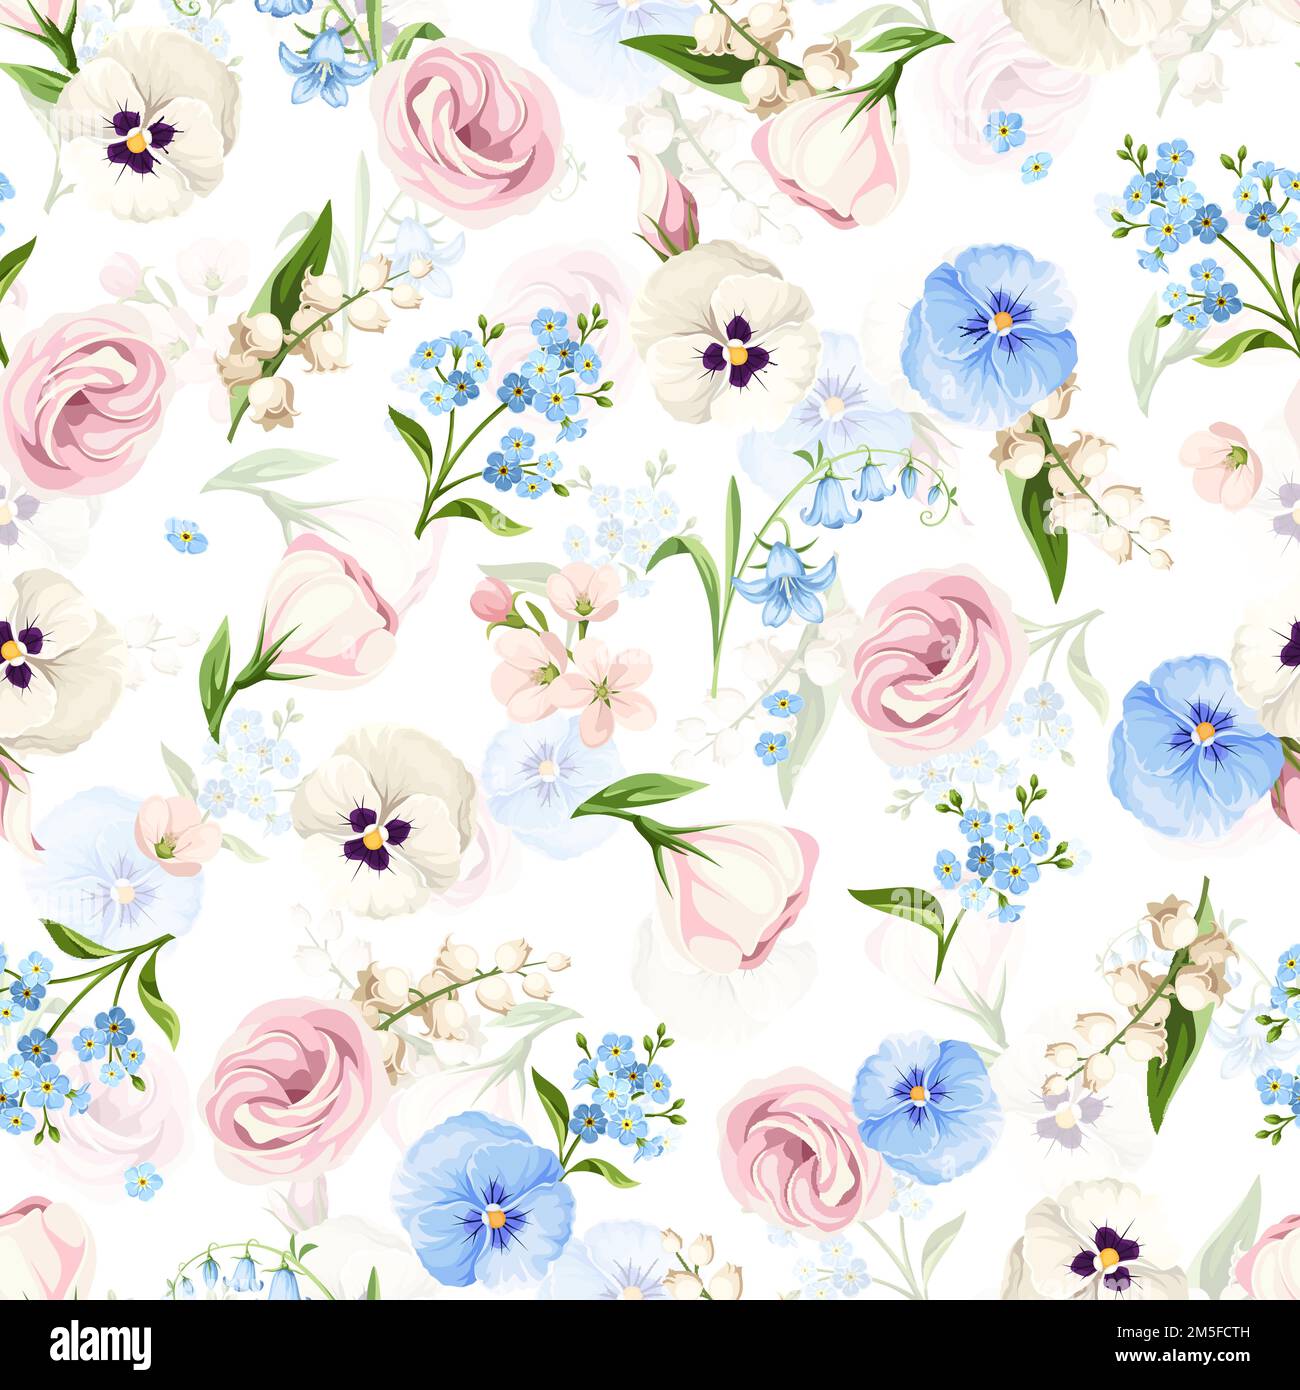 Seamless floral pattern with pink, blue, and white lisianthus flowers, pansy flowers, lily of the valley, and forget-me-not flowers on a white backgro Stock Vector